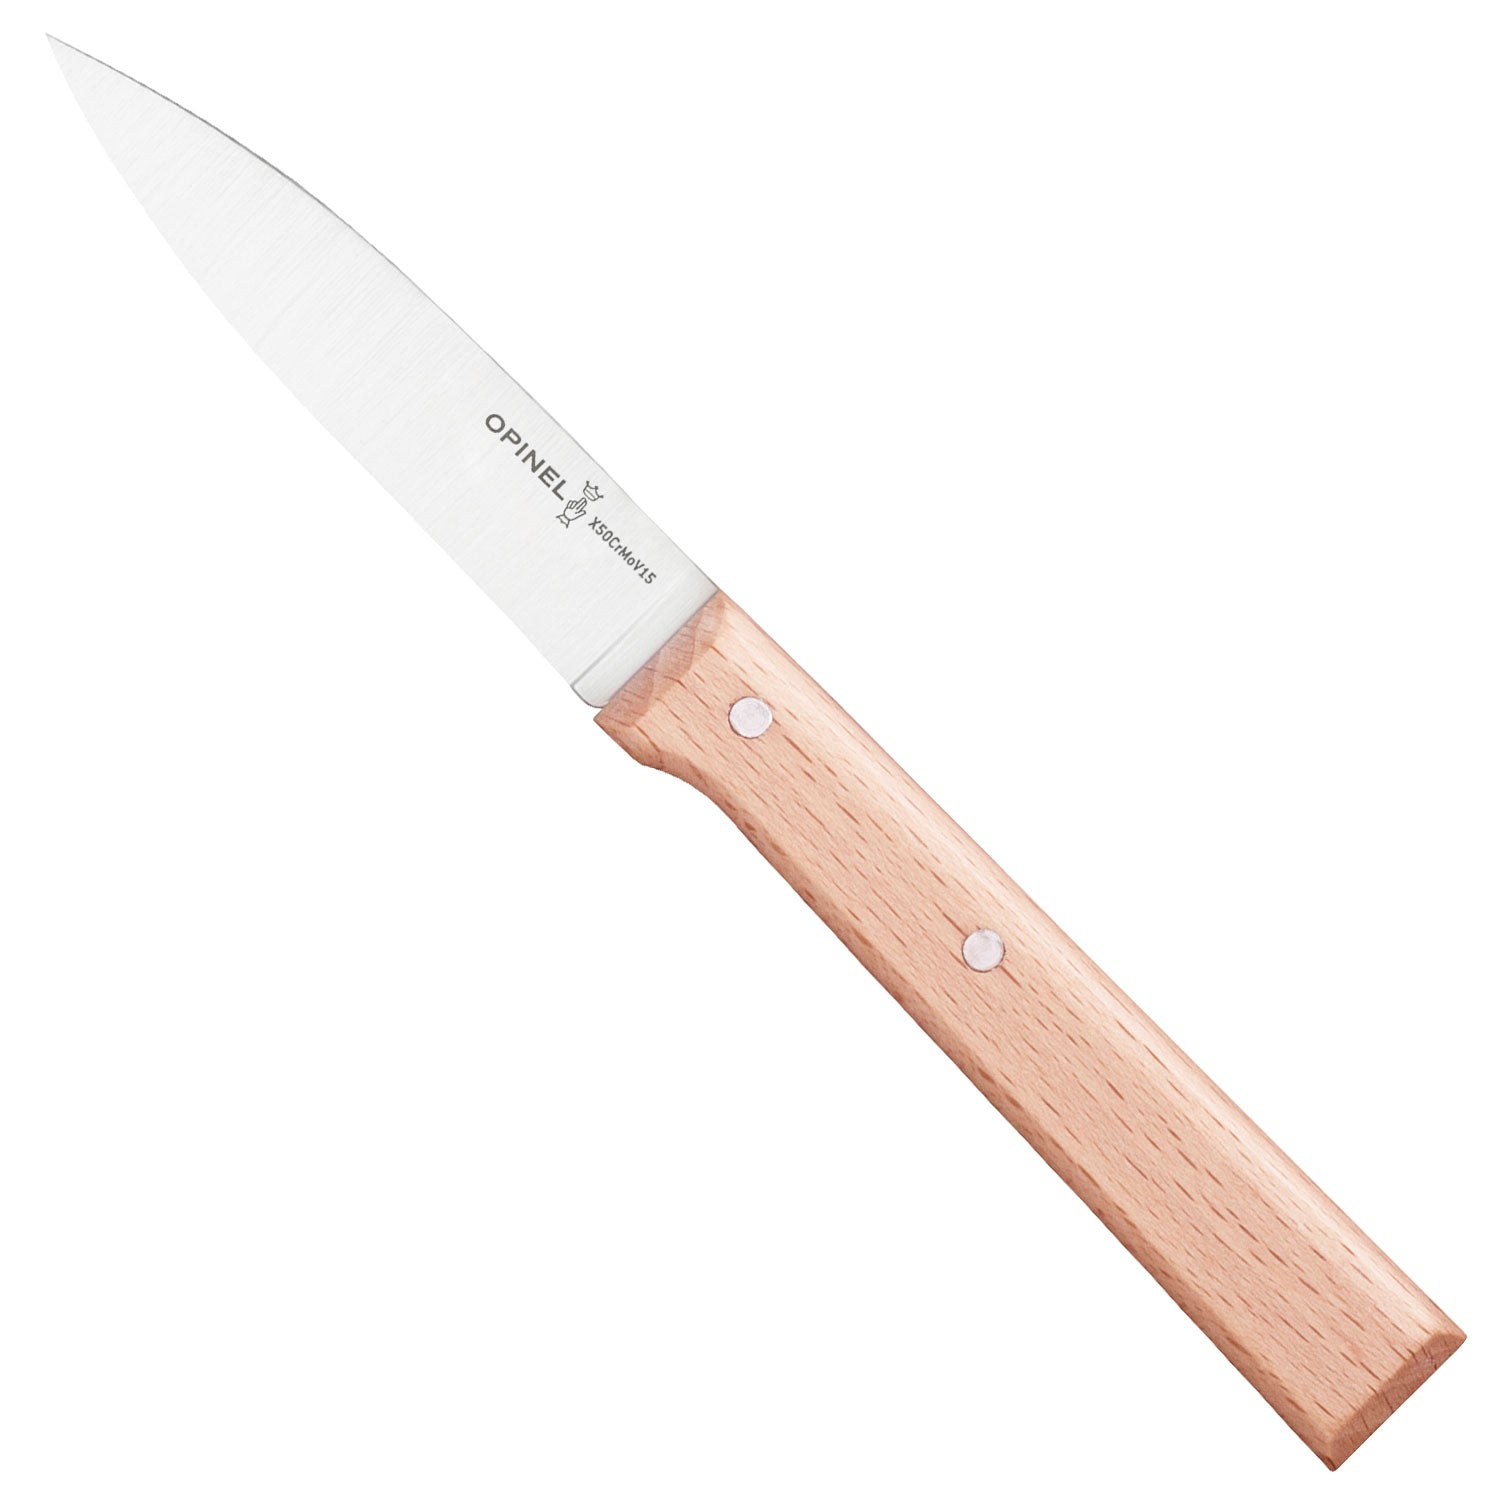 Opinel Paring Knives No112 (Box of 2) - OPINEL USA